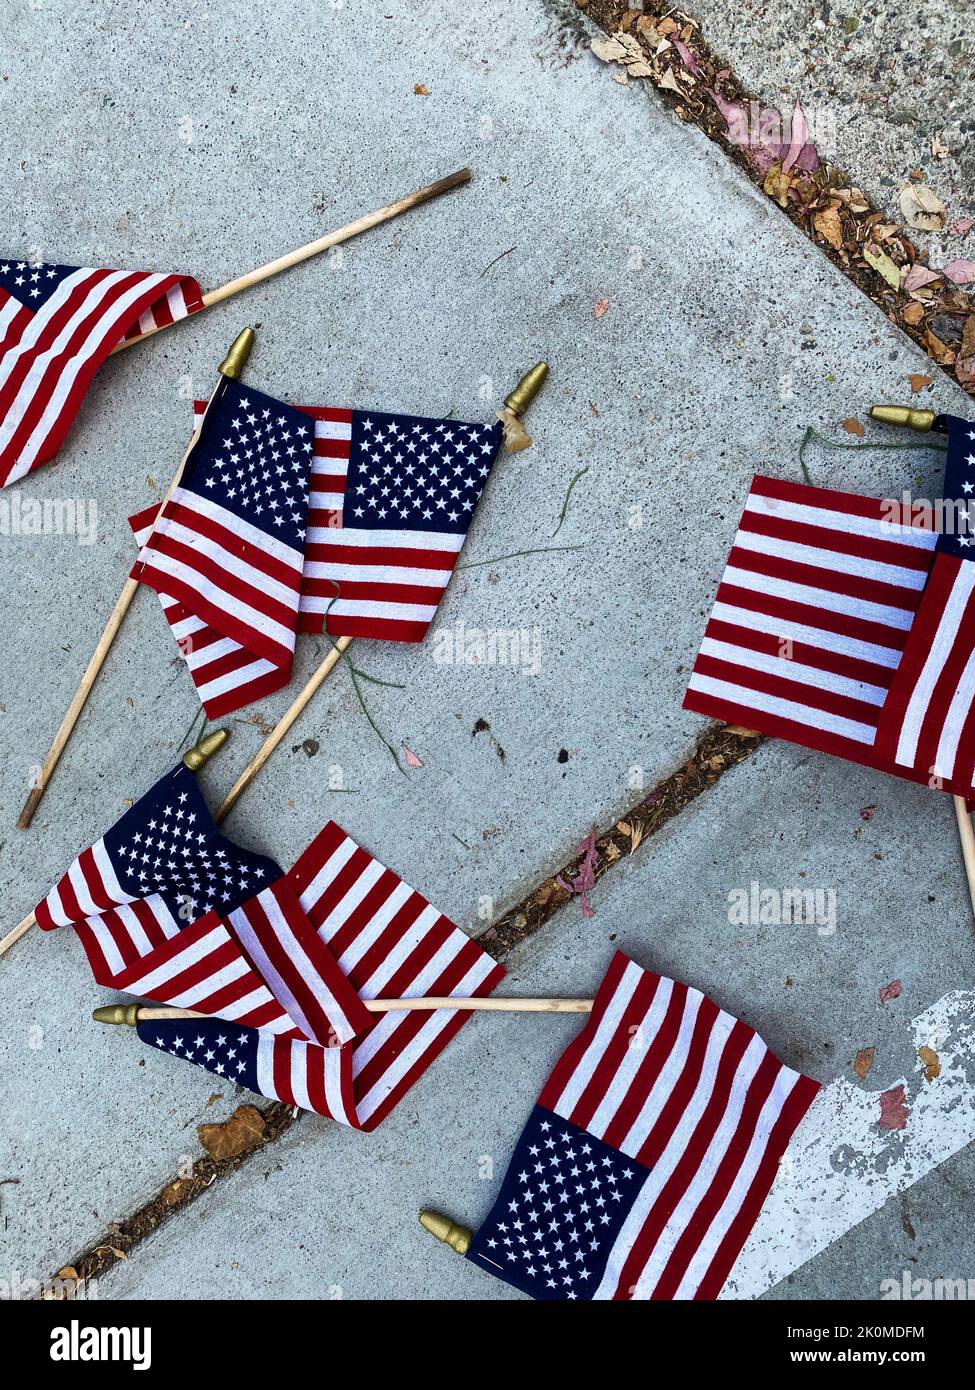 American flags on the ground after a celebration Stock Photo